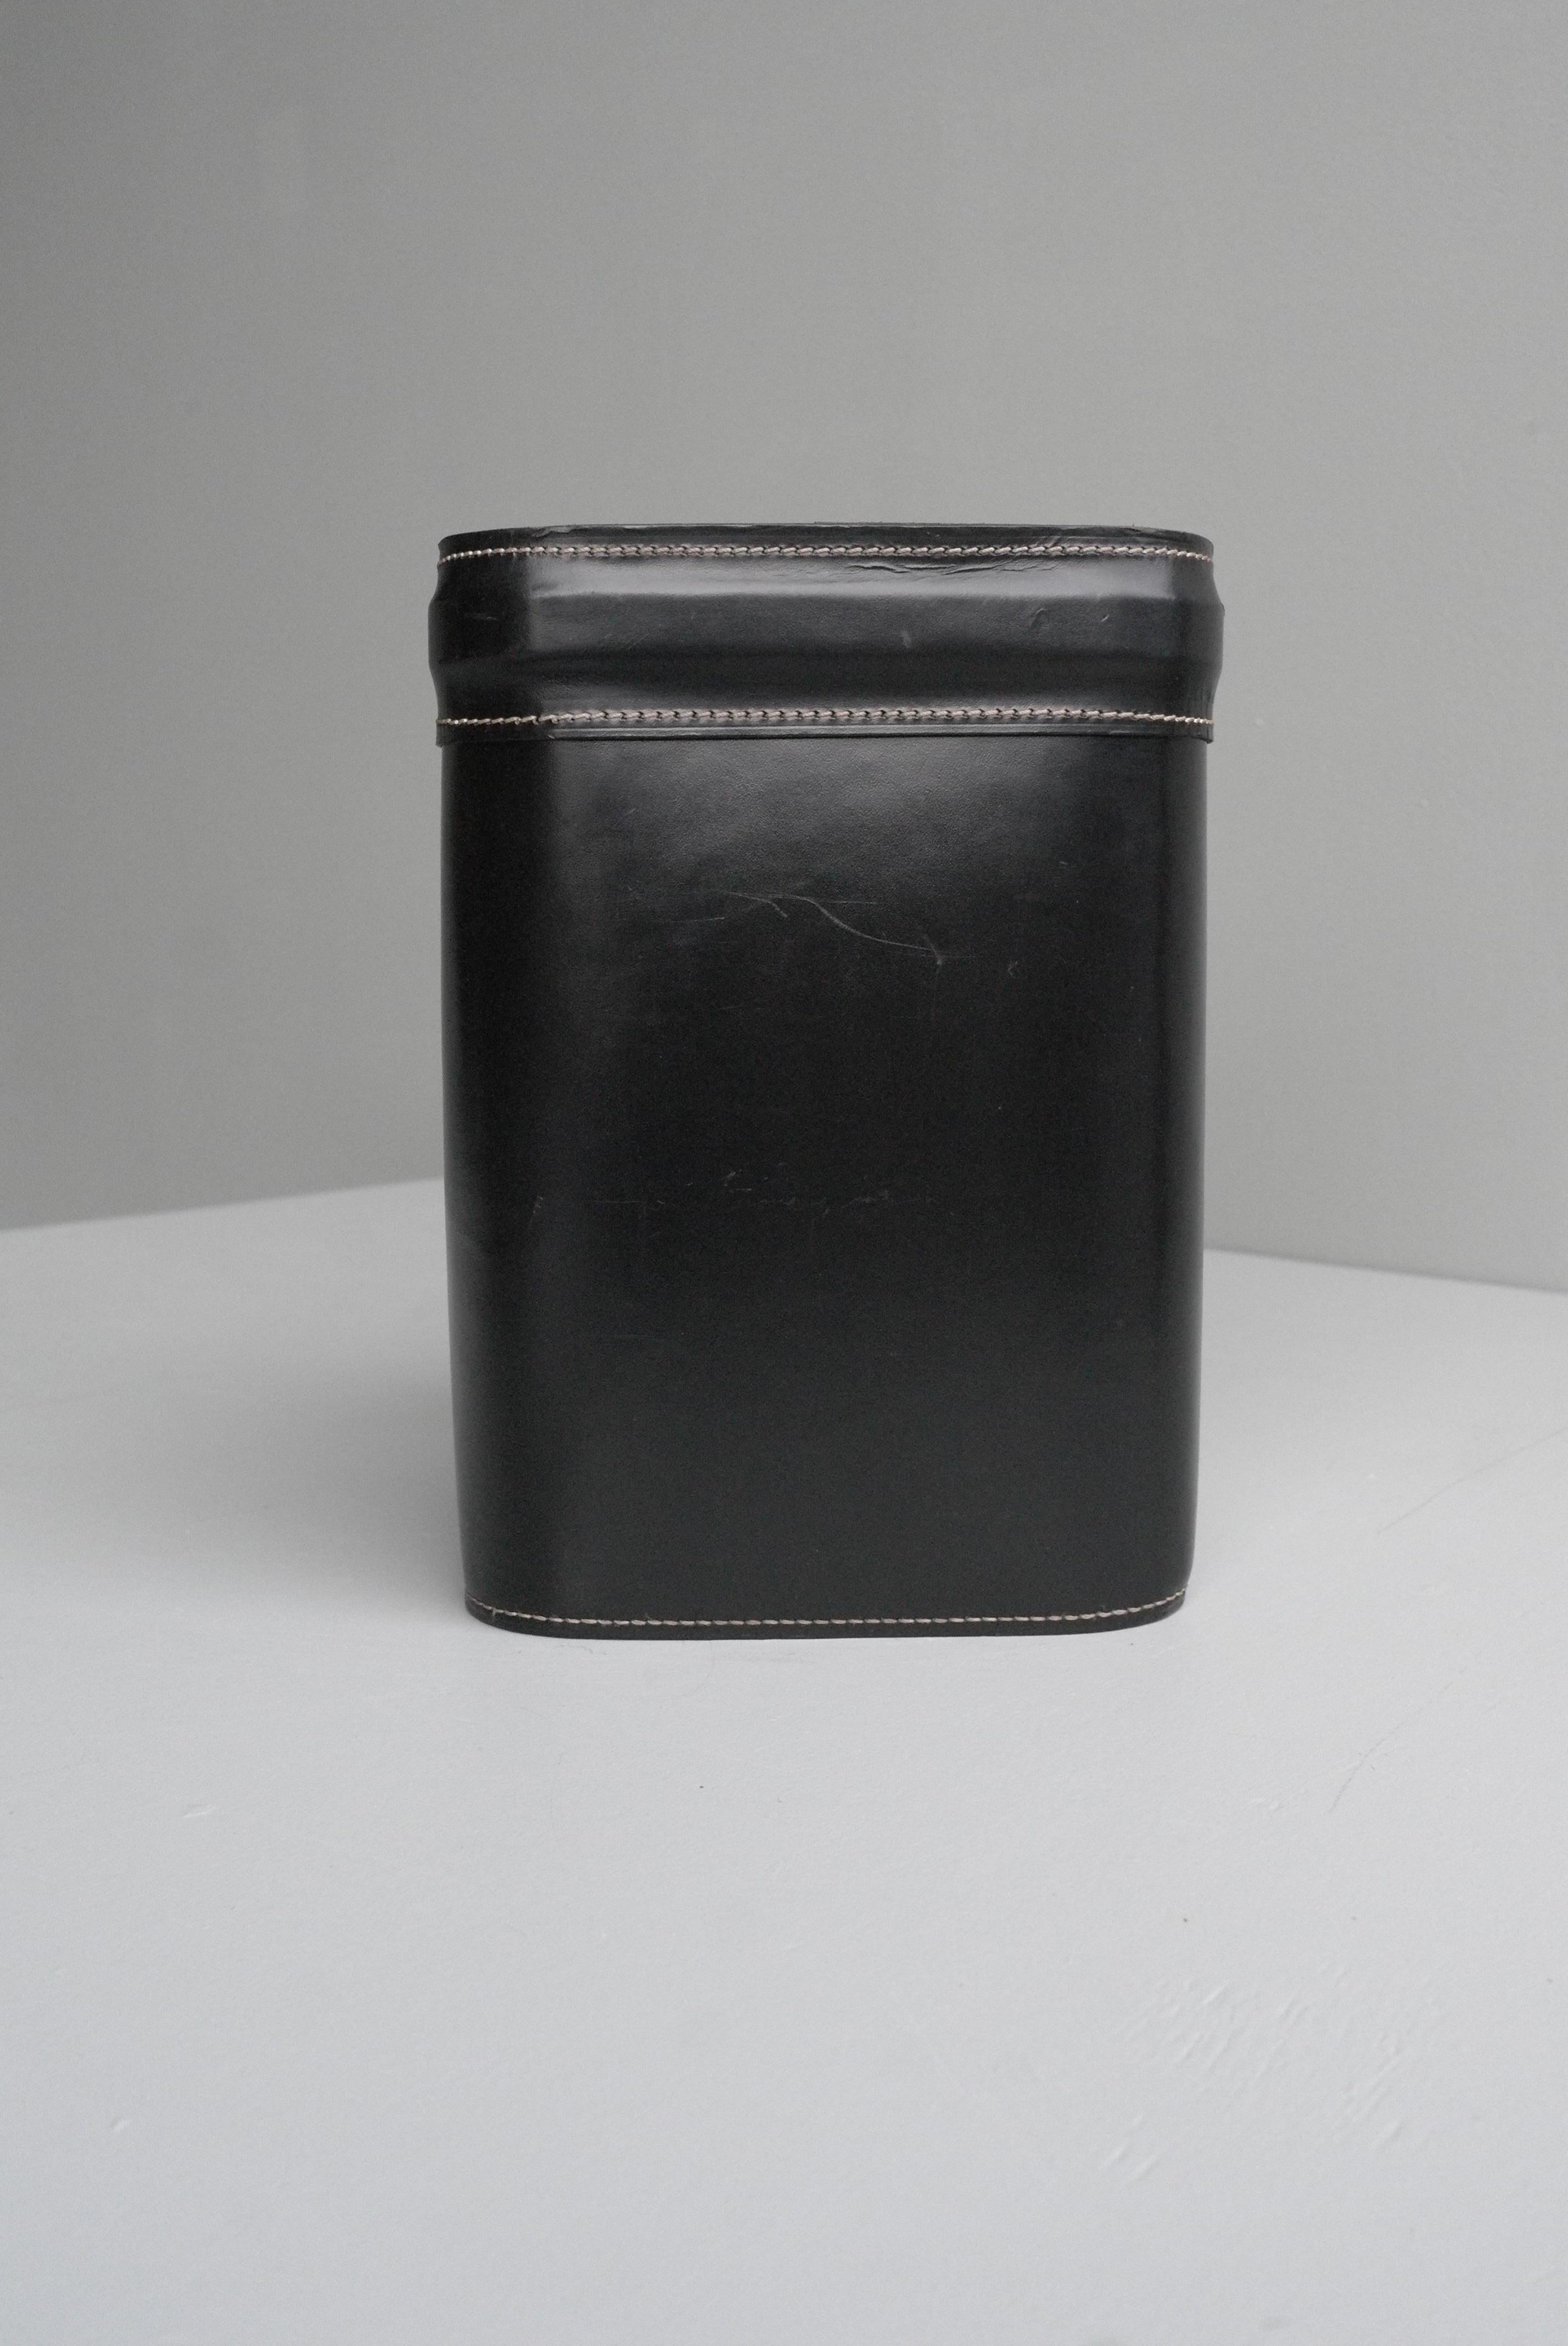 French hand stitched Black leather waste paper basket.